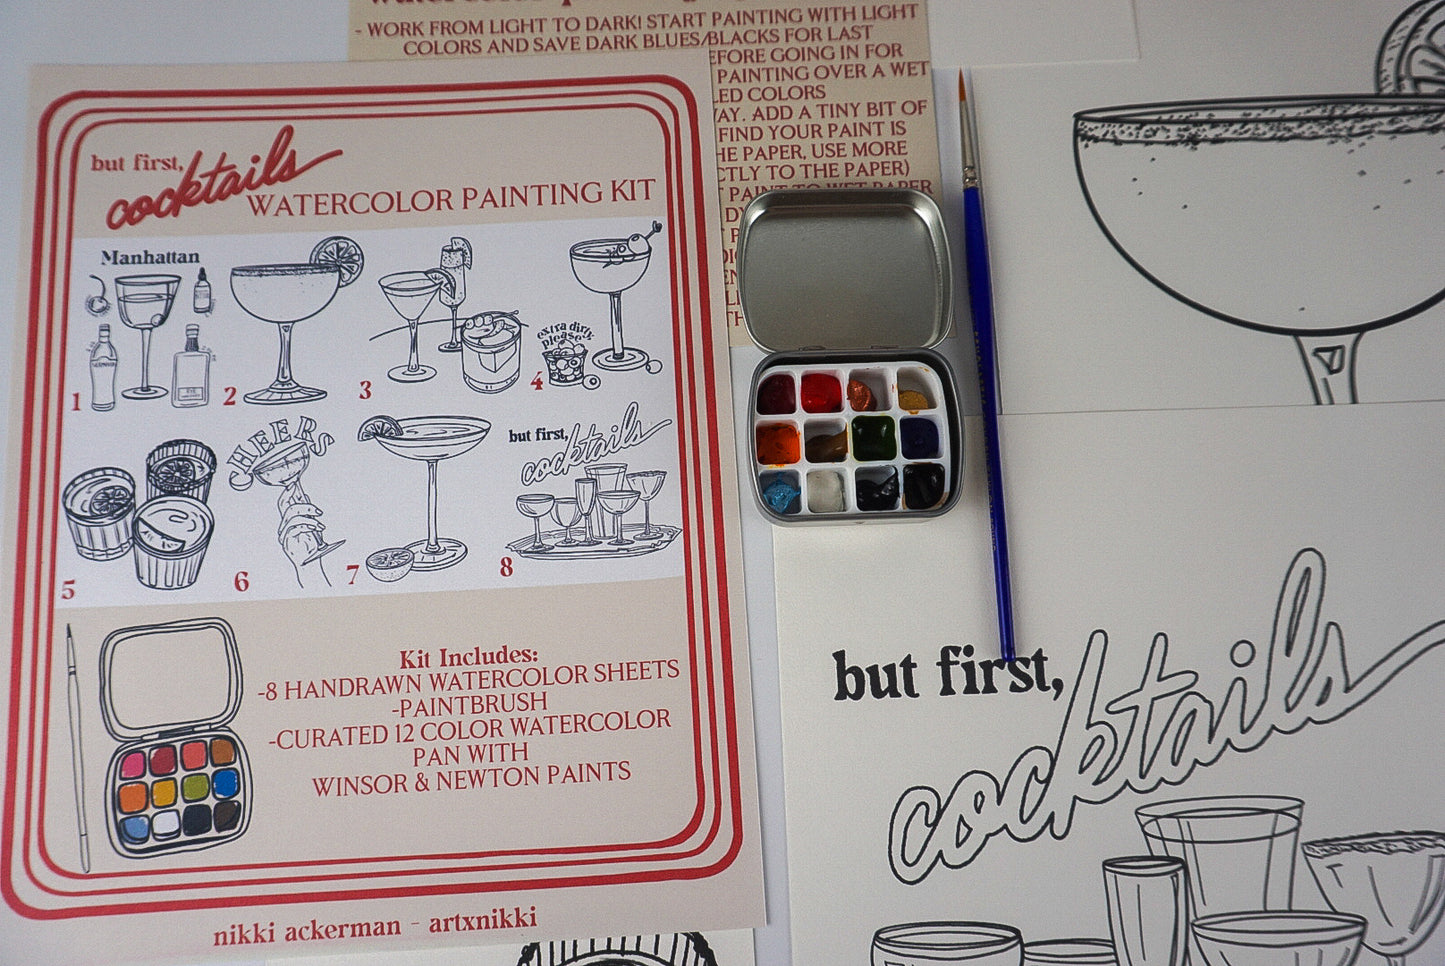 Watercolor Painting Kit: But First, Cocktails